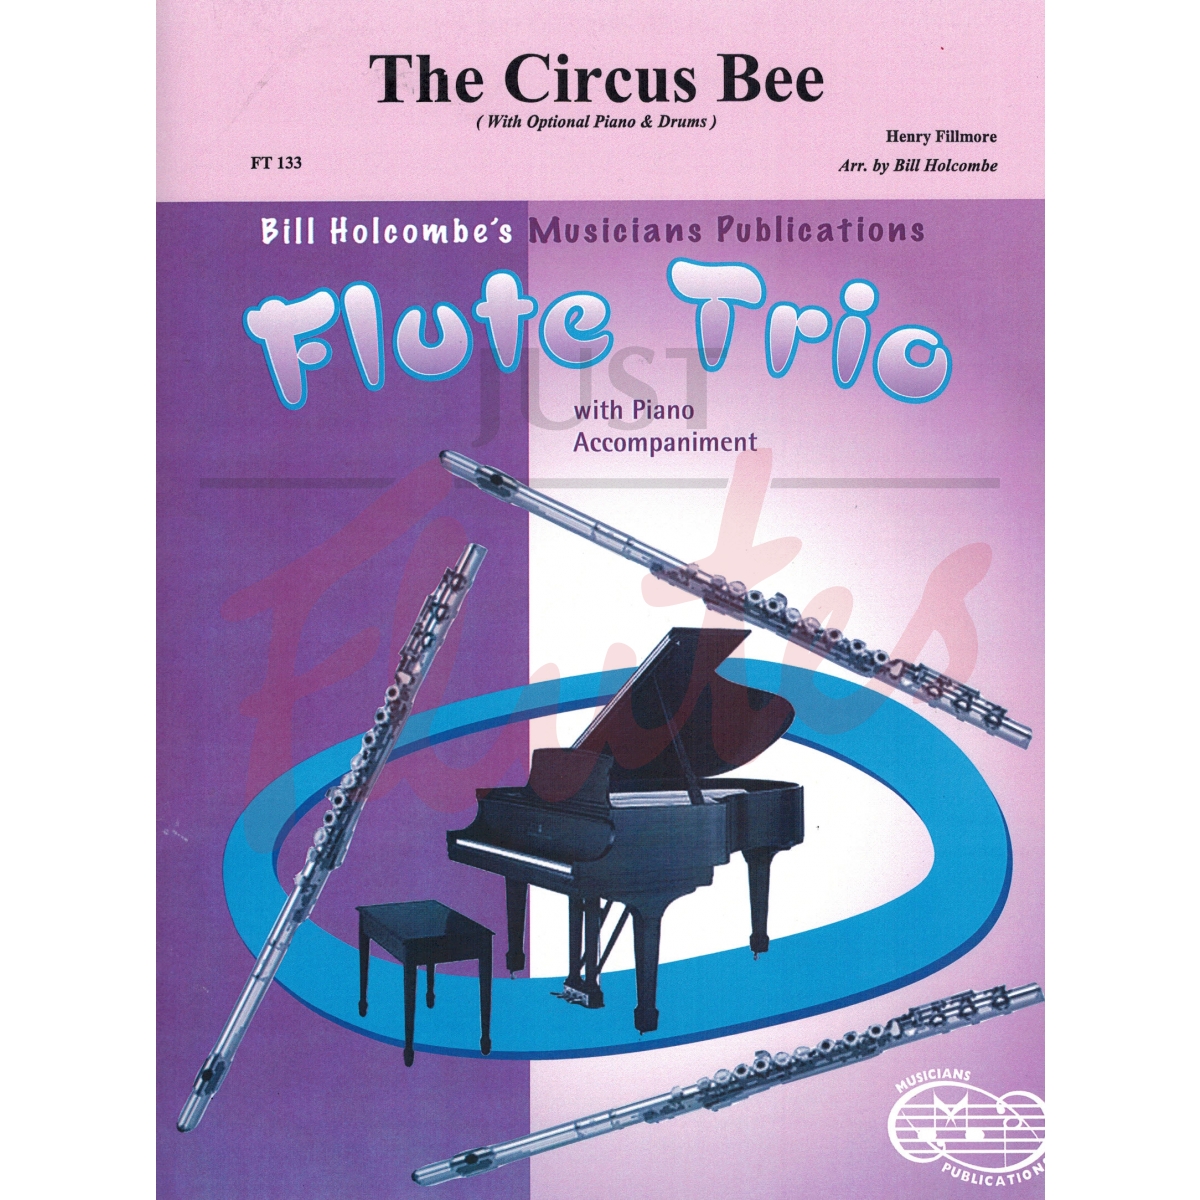 The Circus Bee for Three Flutes and Piano